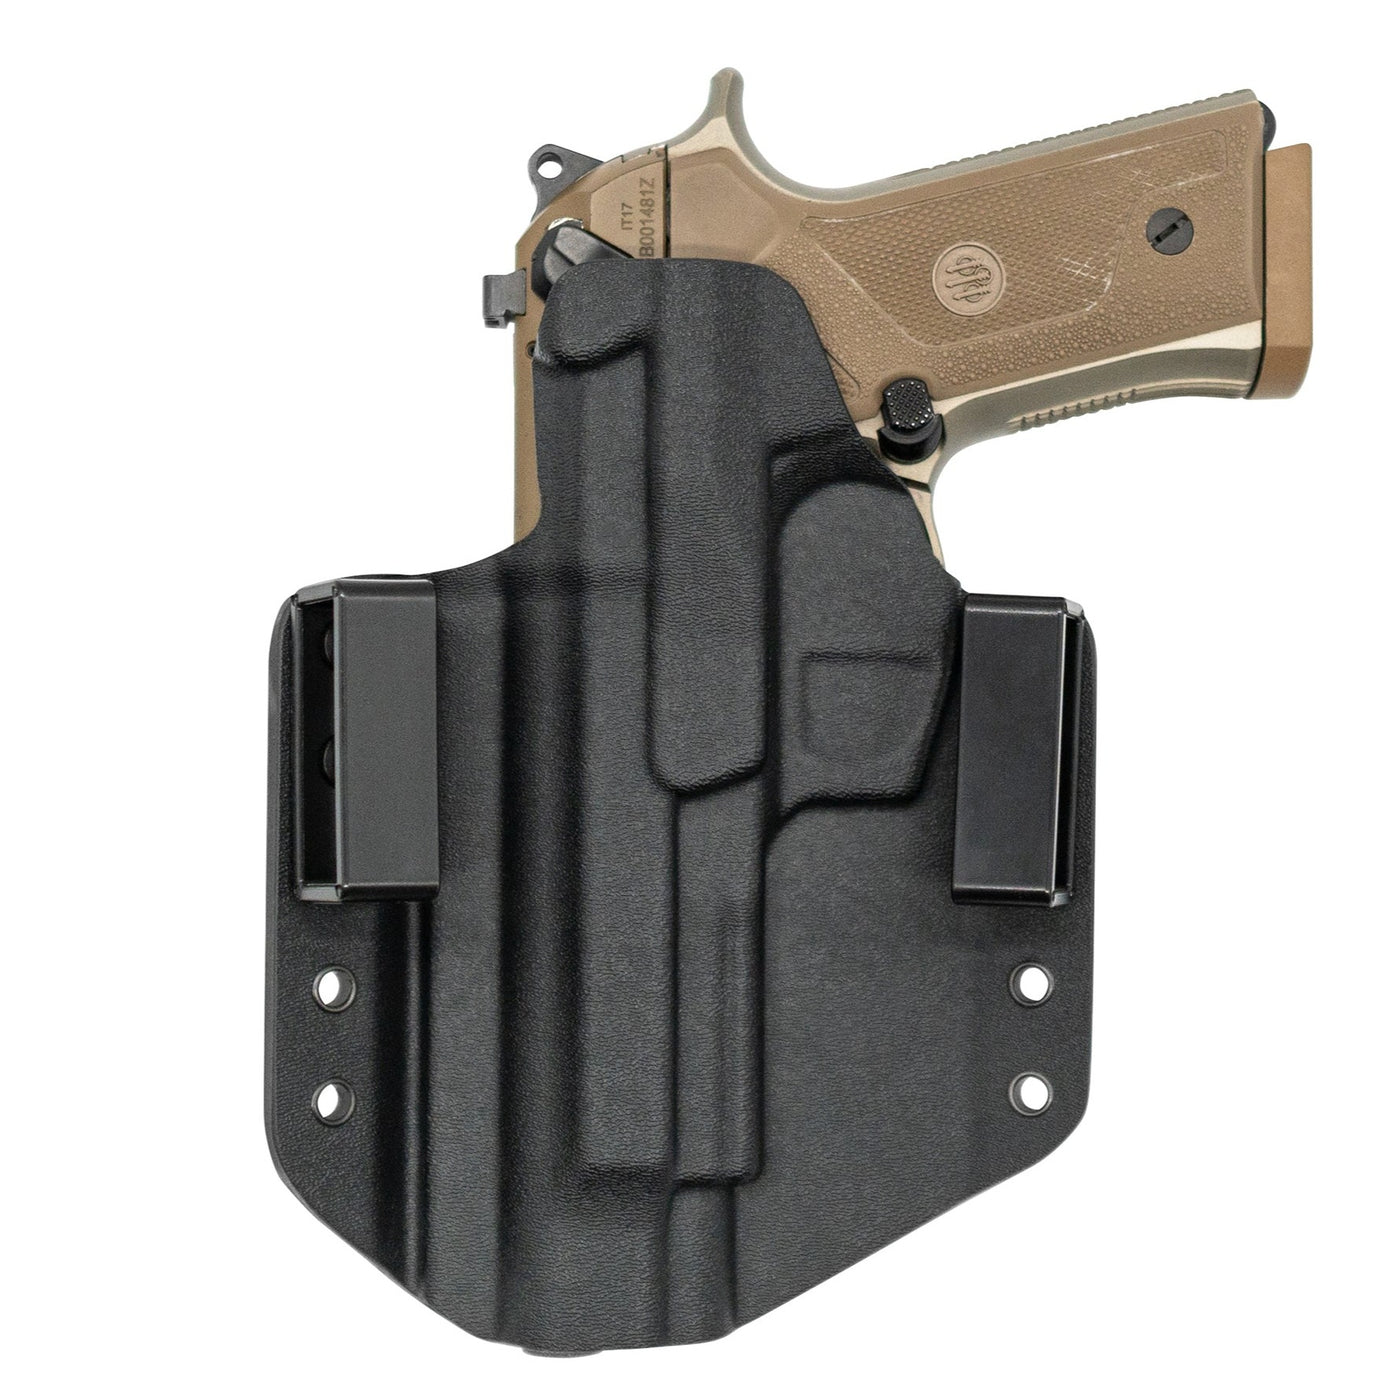 This the rear of a custom C&G Holsters outside the waistband holster for the Beretta